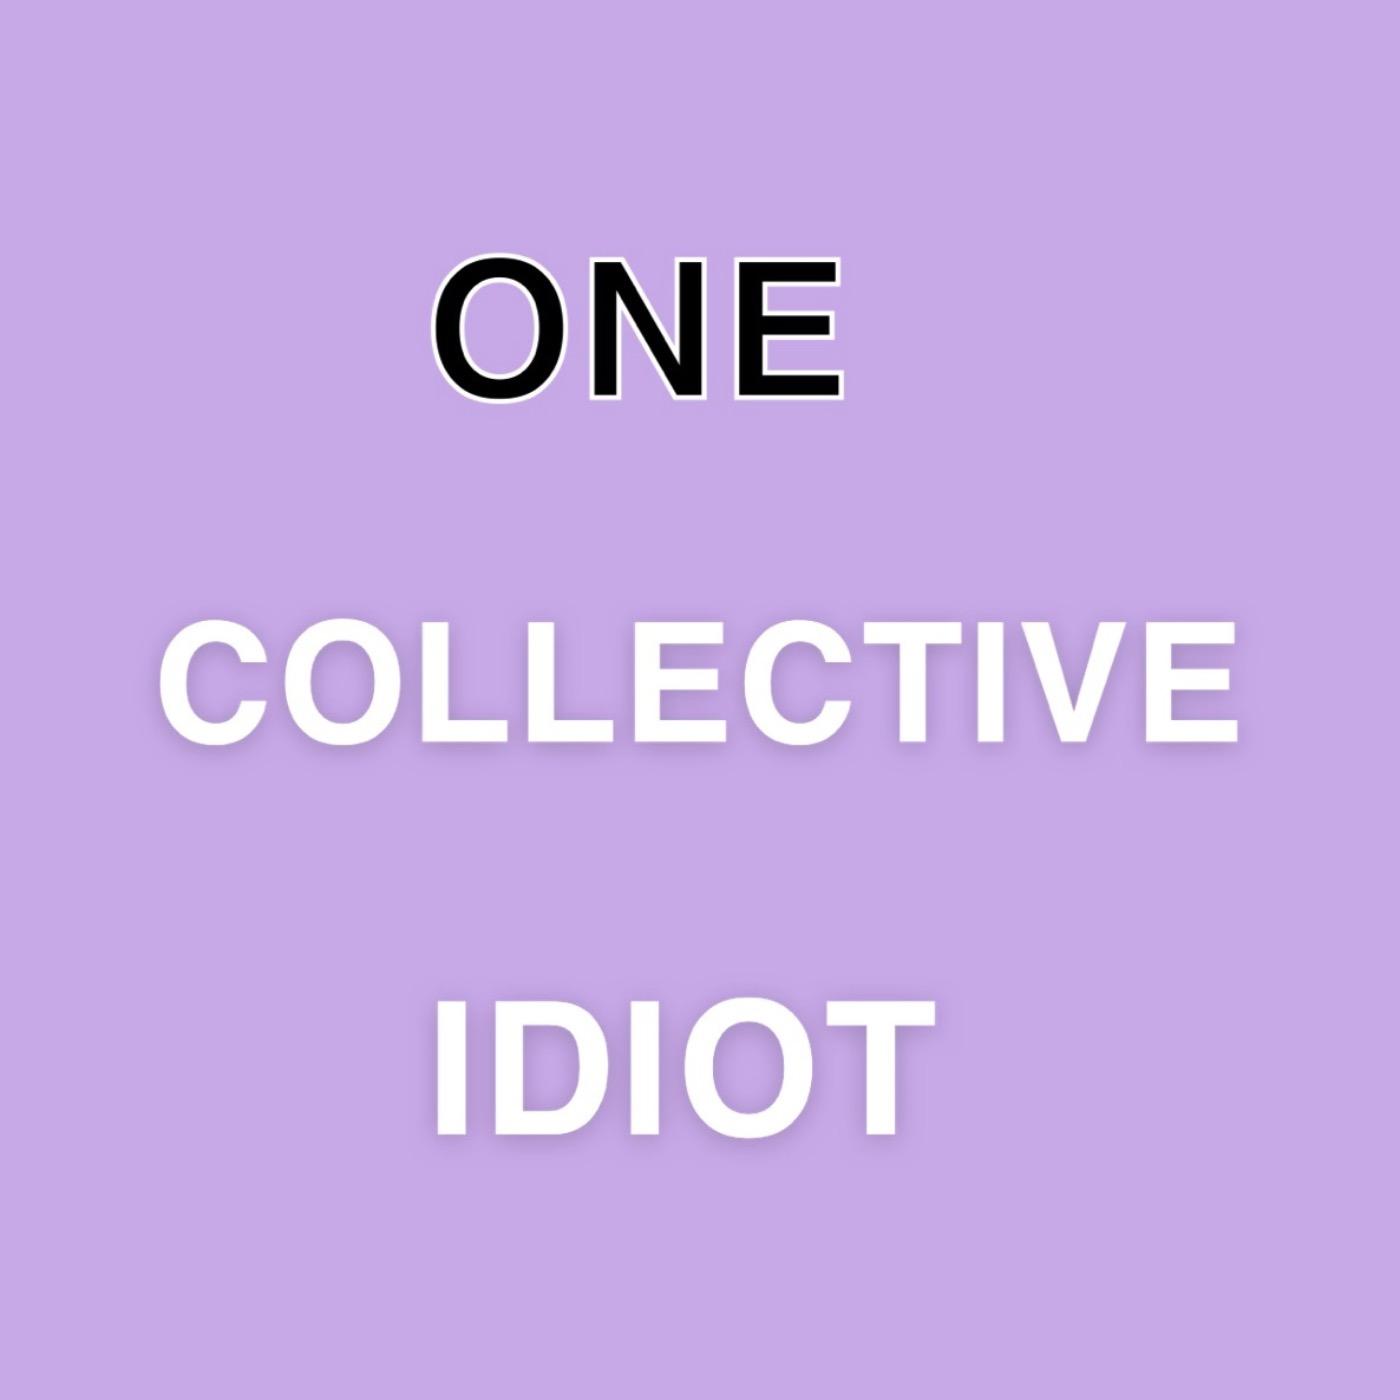 One Collective Idiot